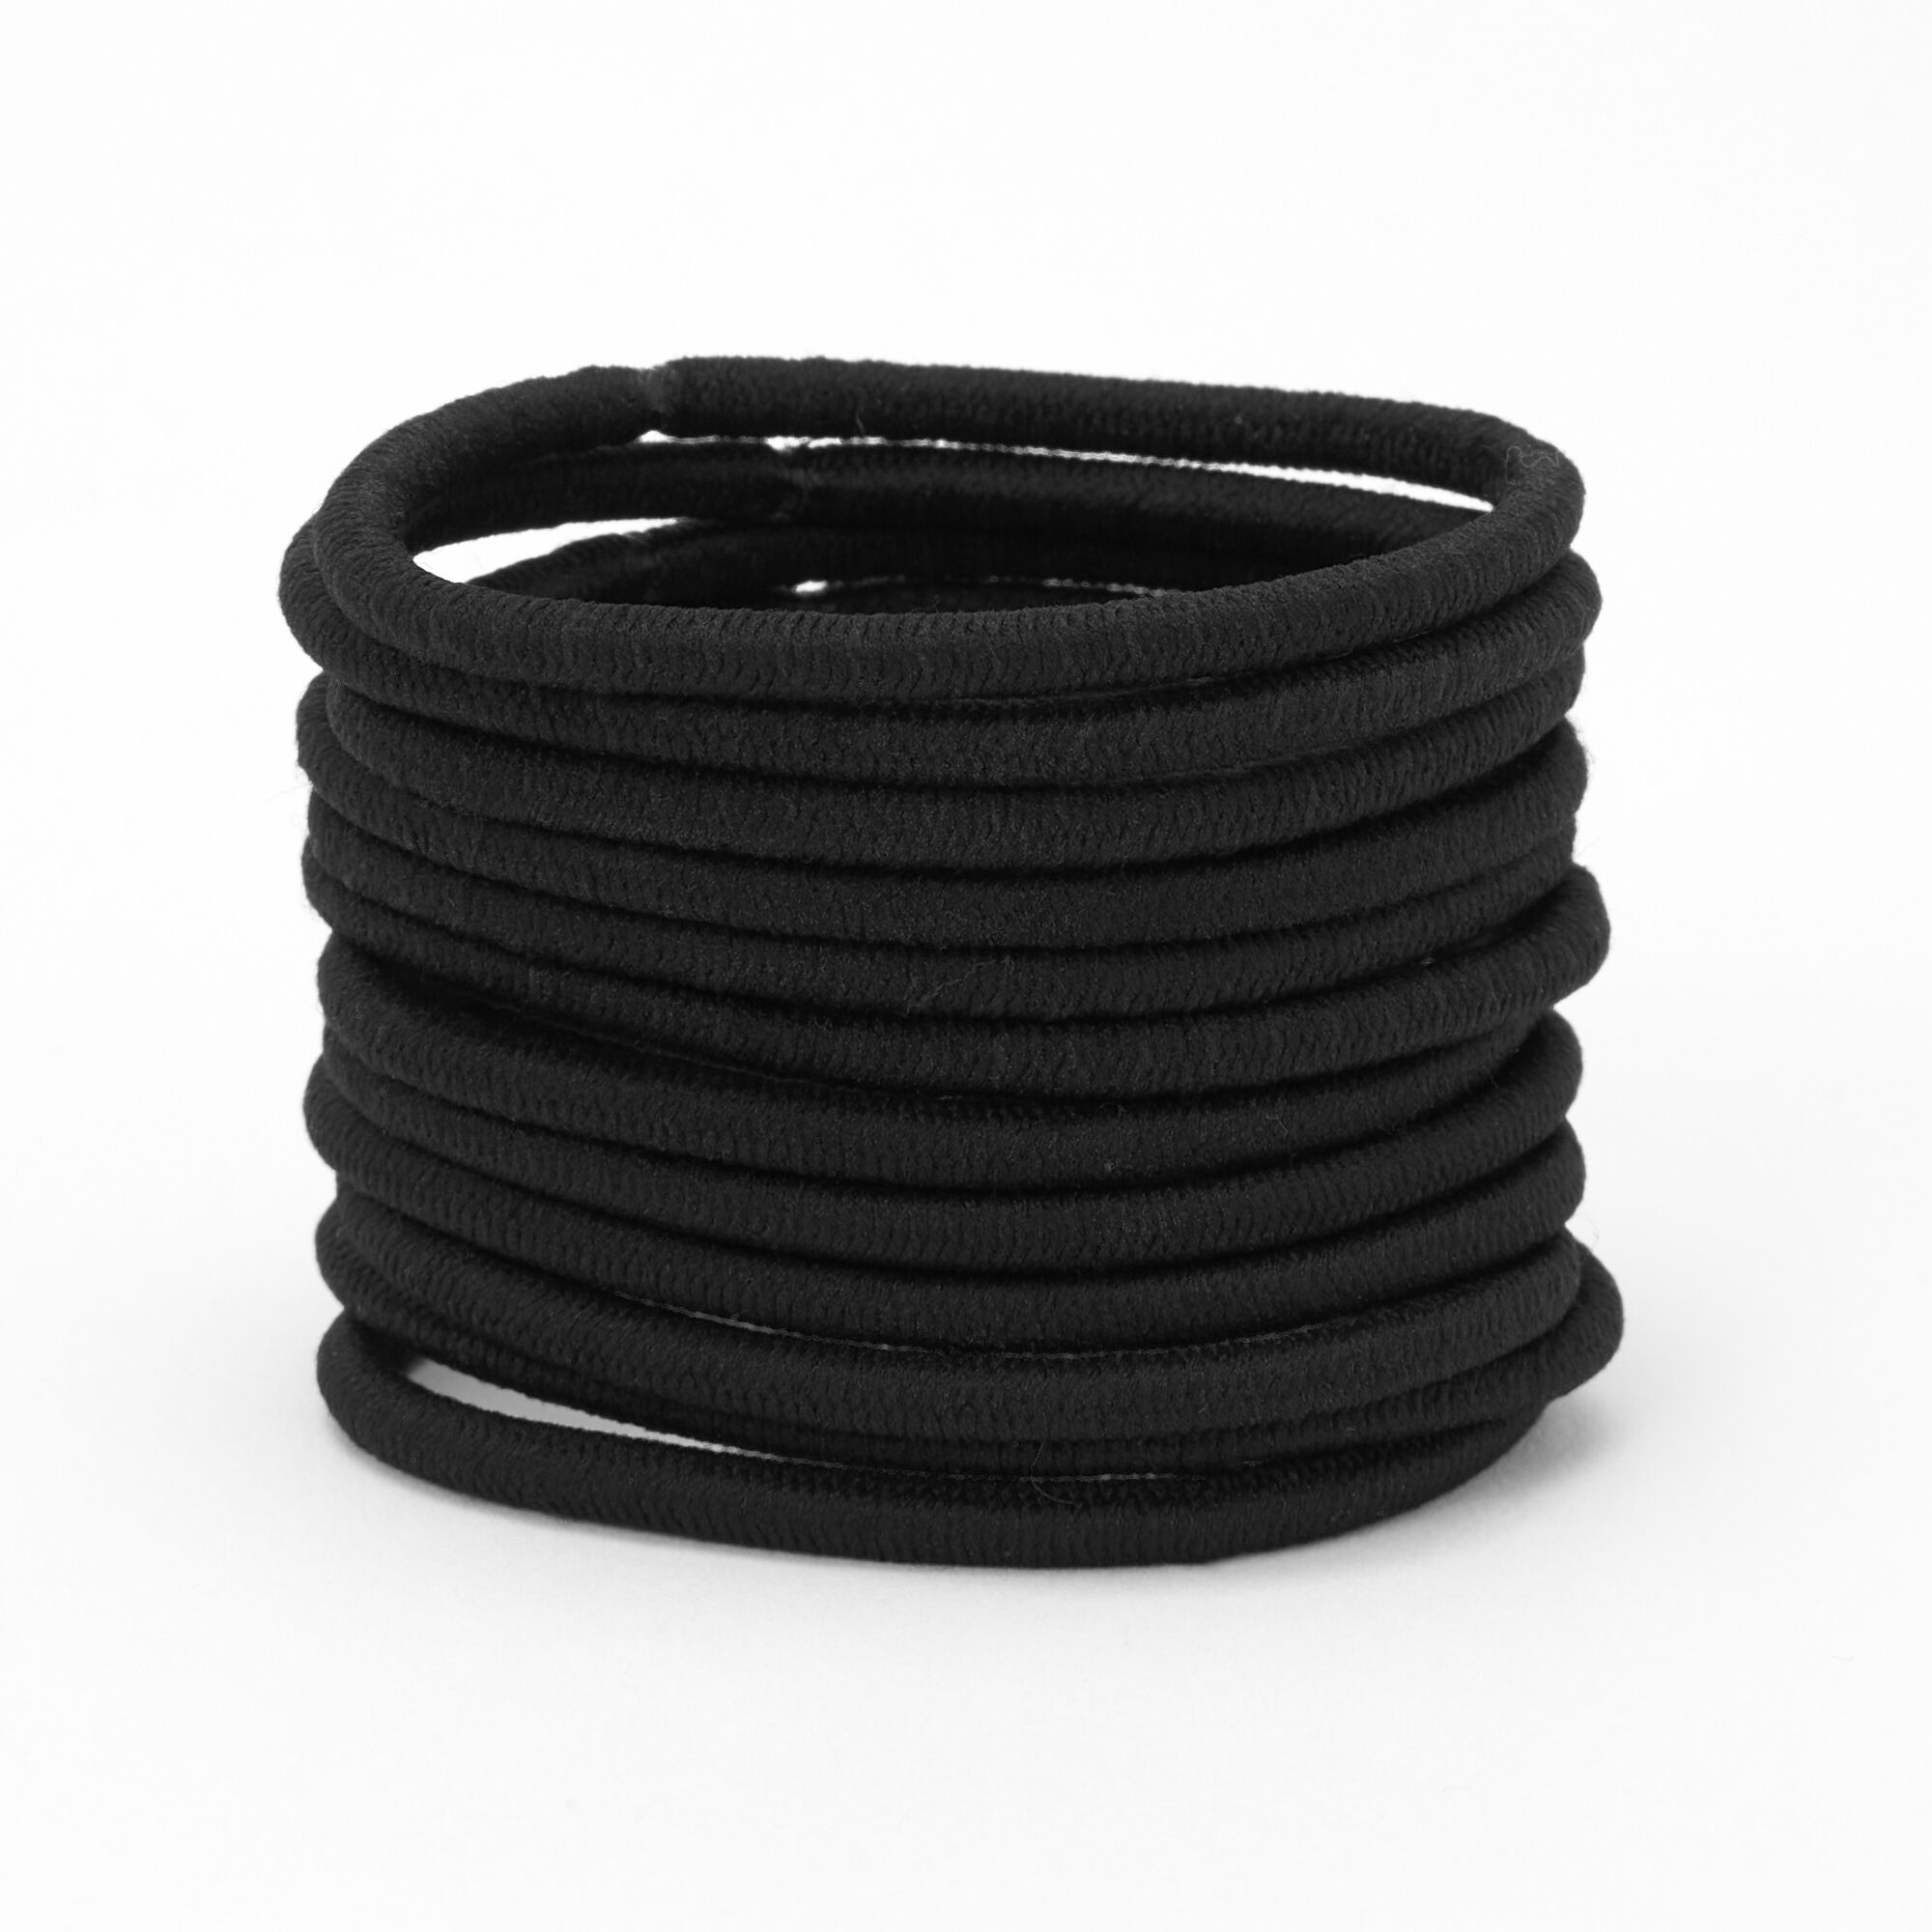 View Claires Luxe Hair Ties Black 12 Pack information